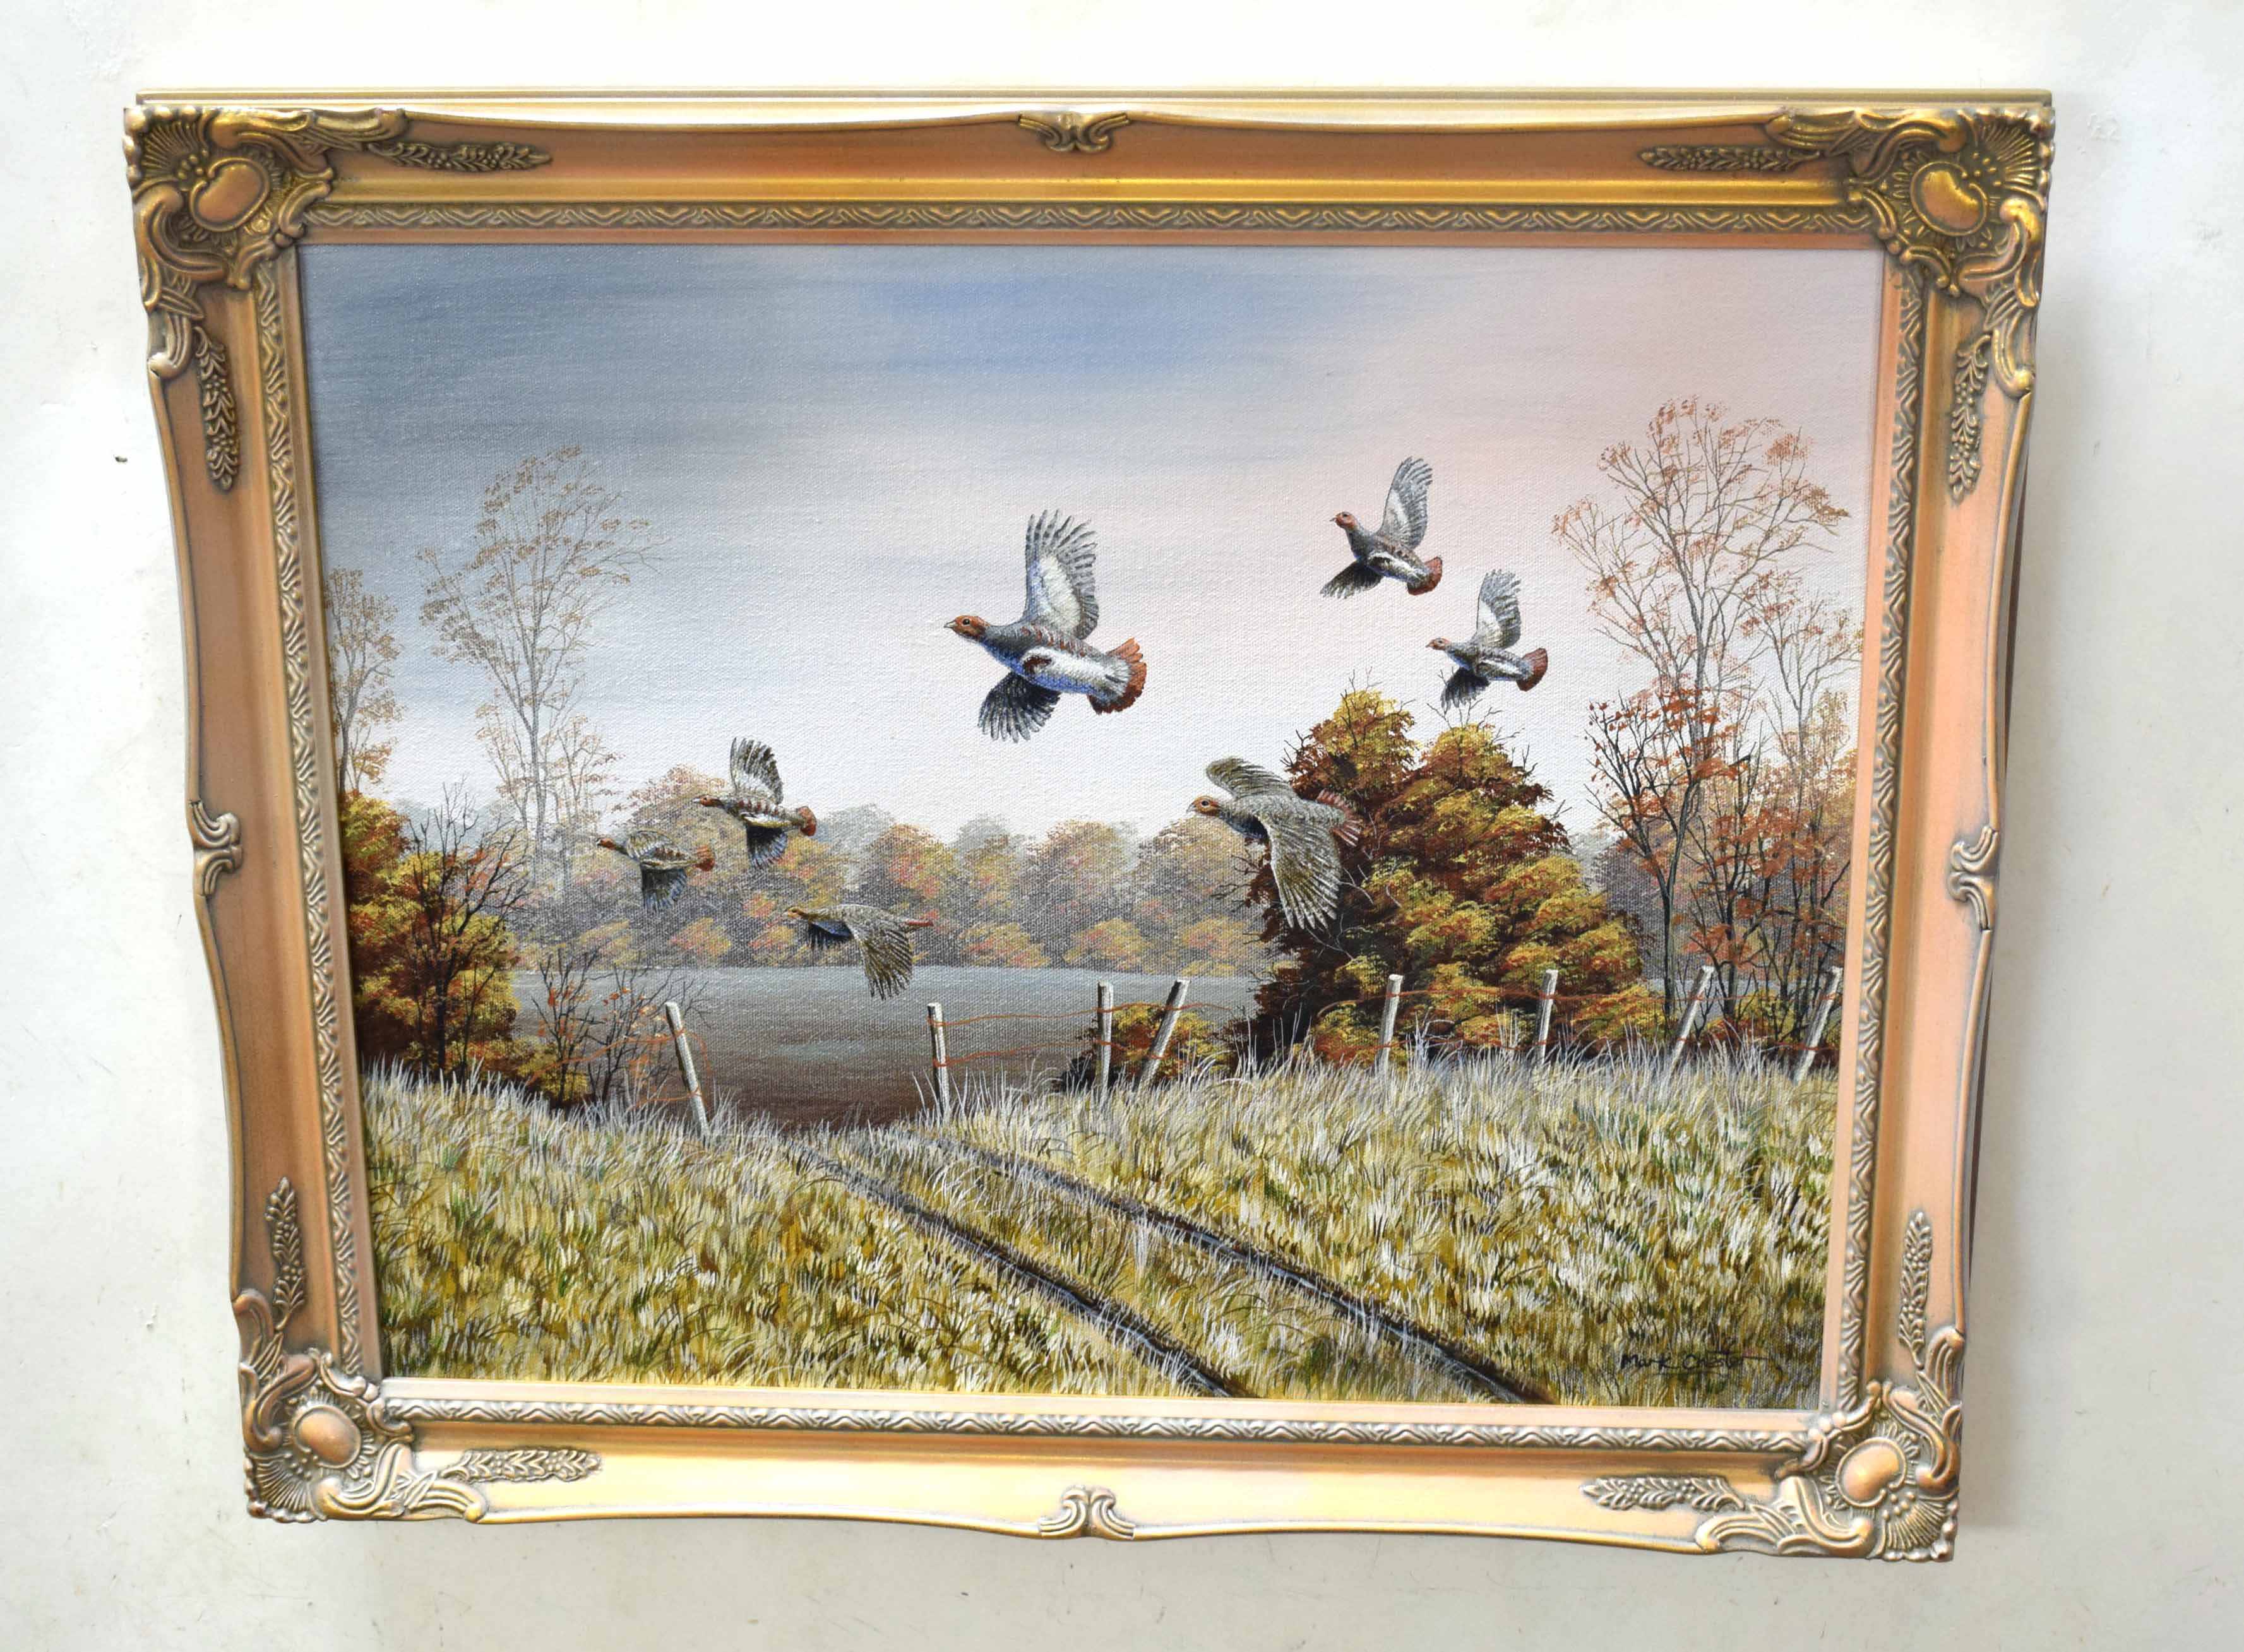 Mark Chester (contemporary), "Autumn covey - English Partridges", acrylic on canvas, signed lower